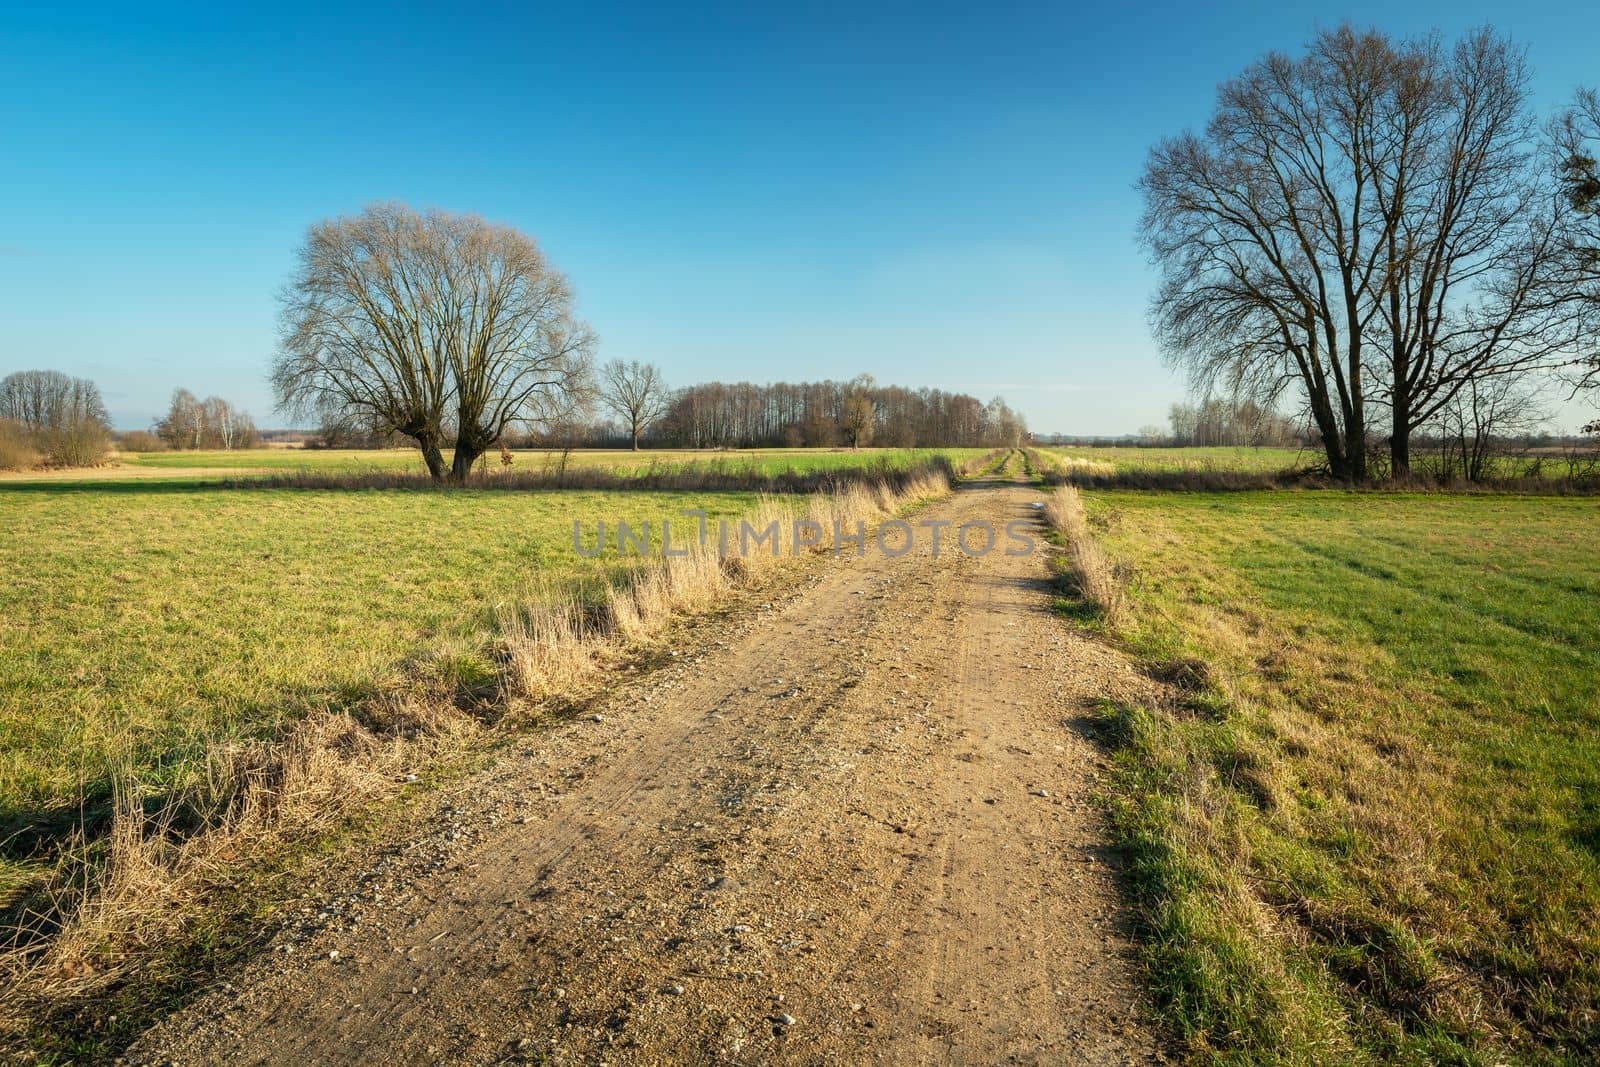 Unpaved road between green meadows and trees, picturesque eastern Poland